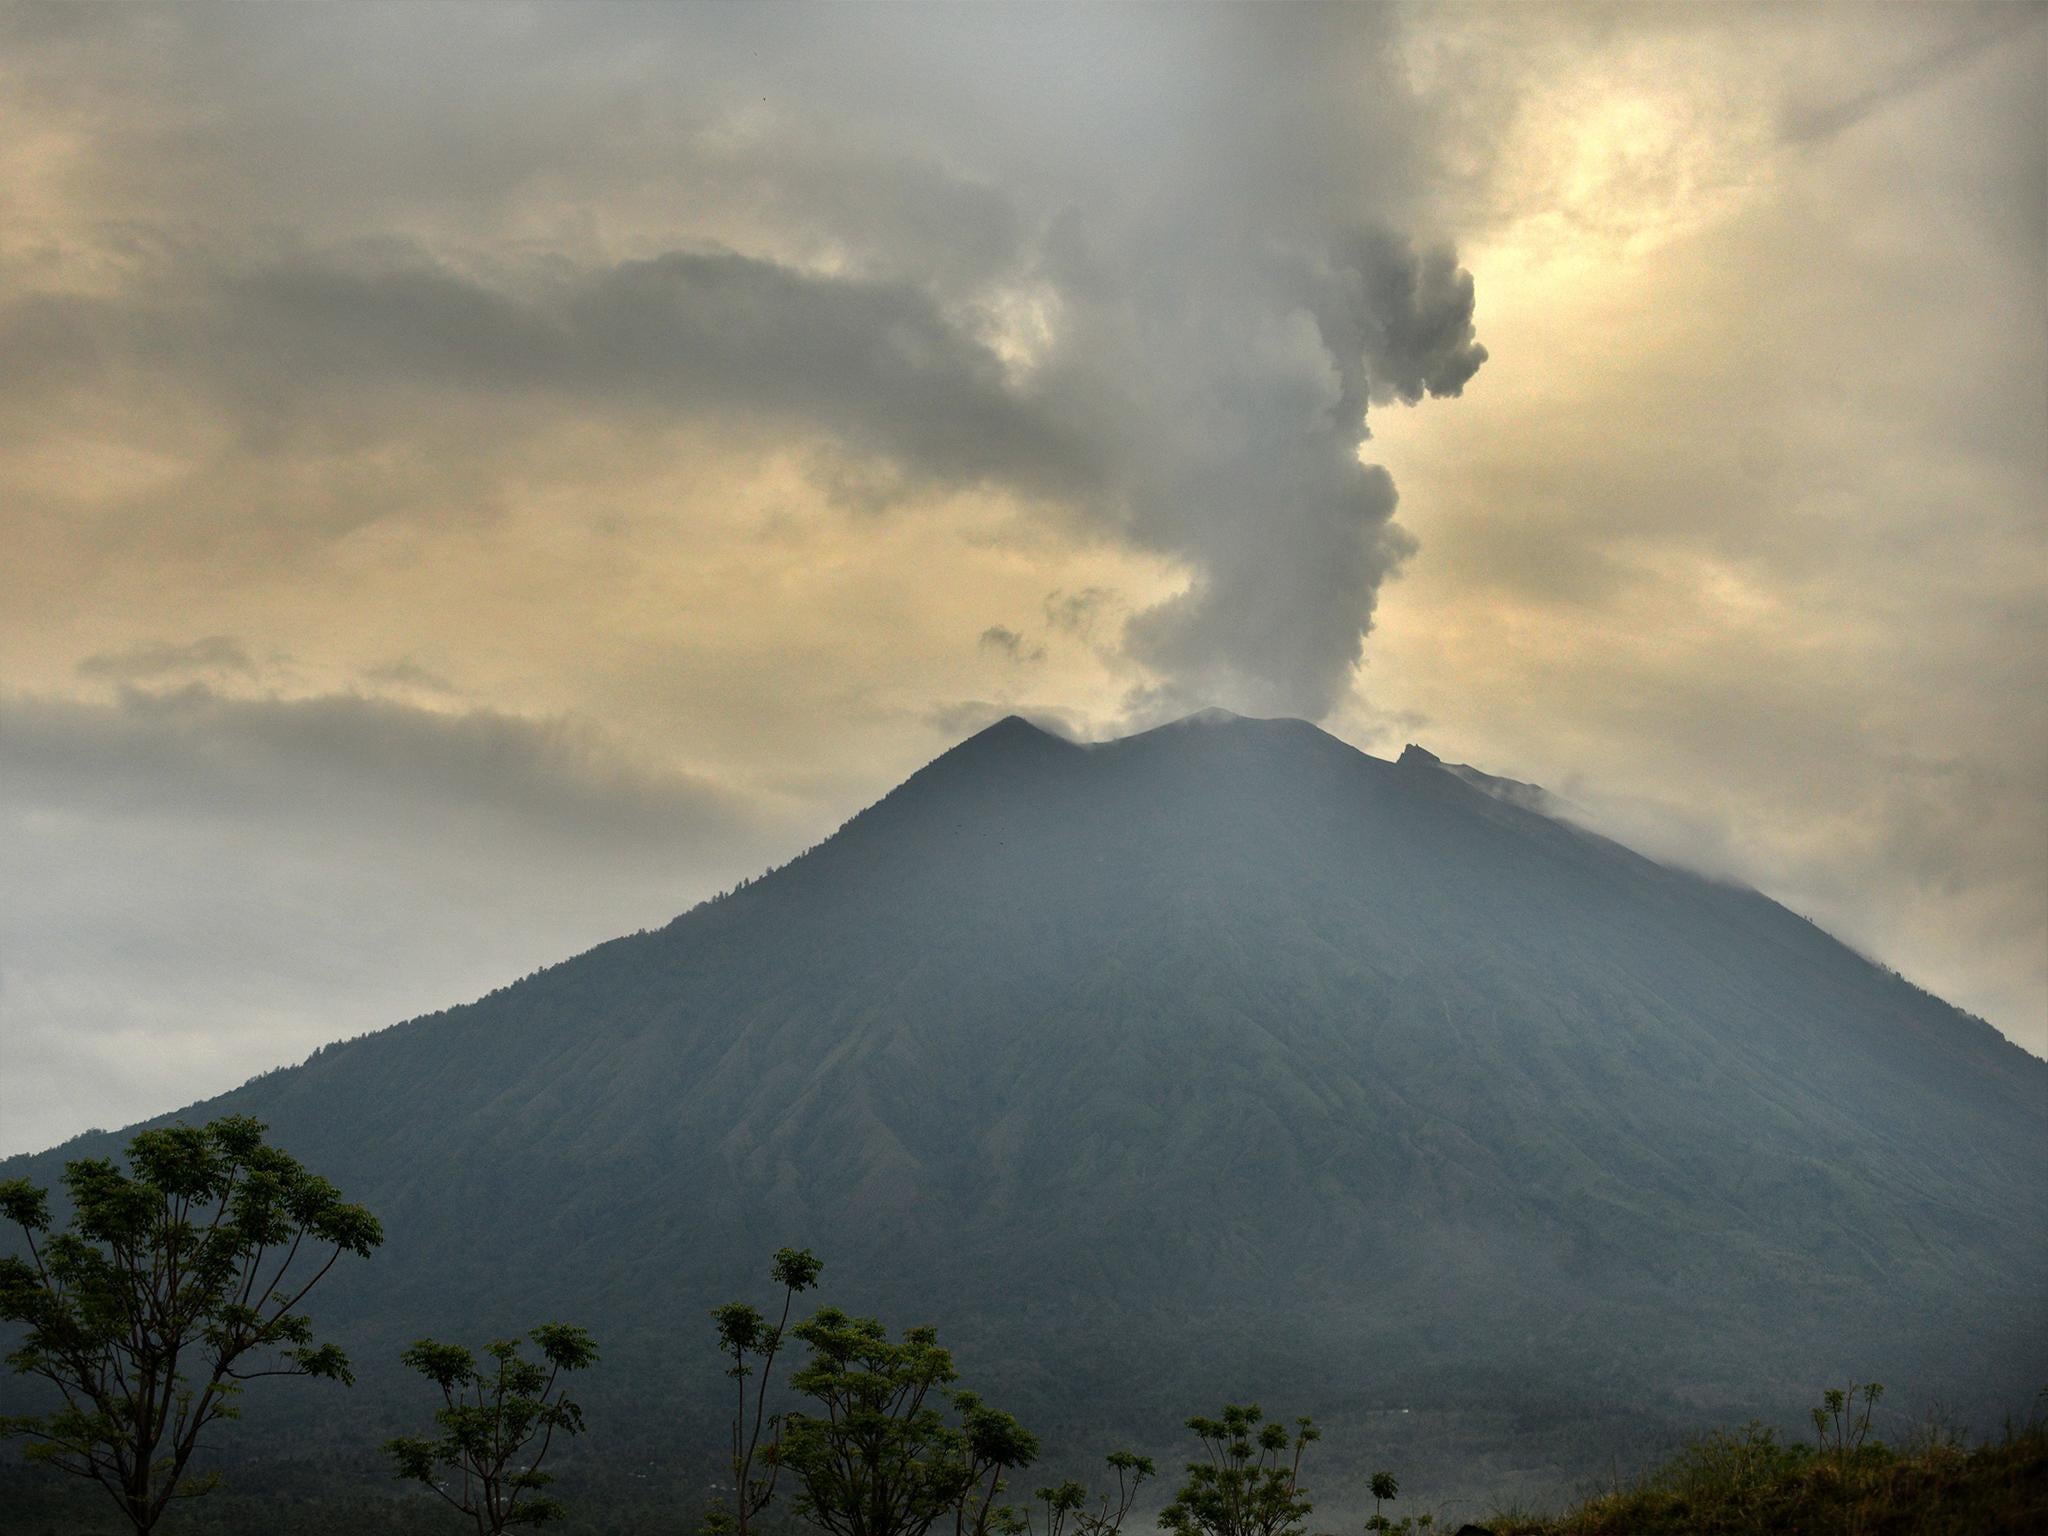 Mount Agung is currently on Amber Alert